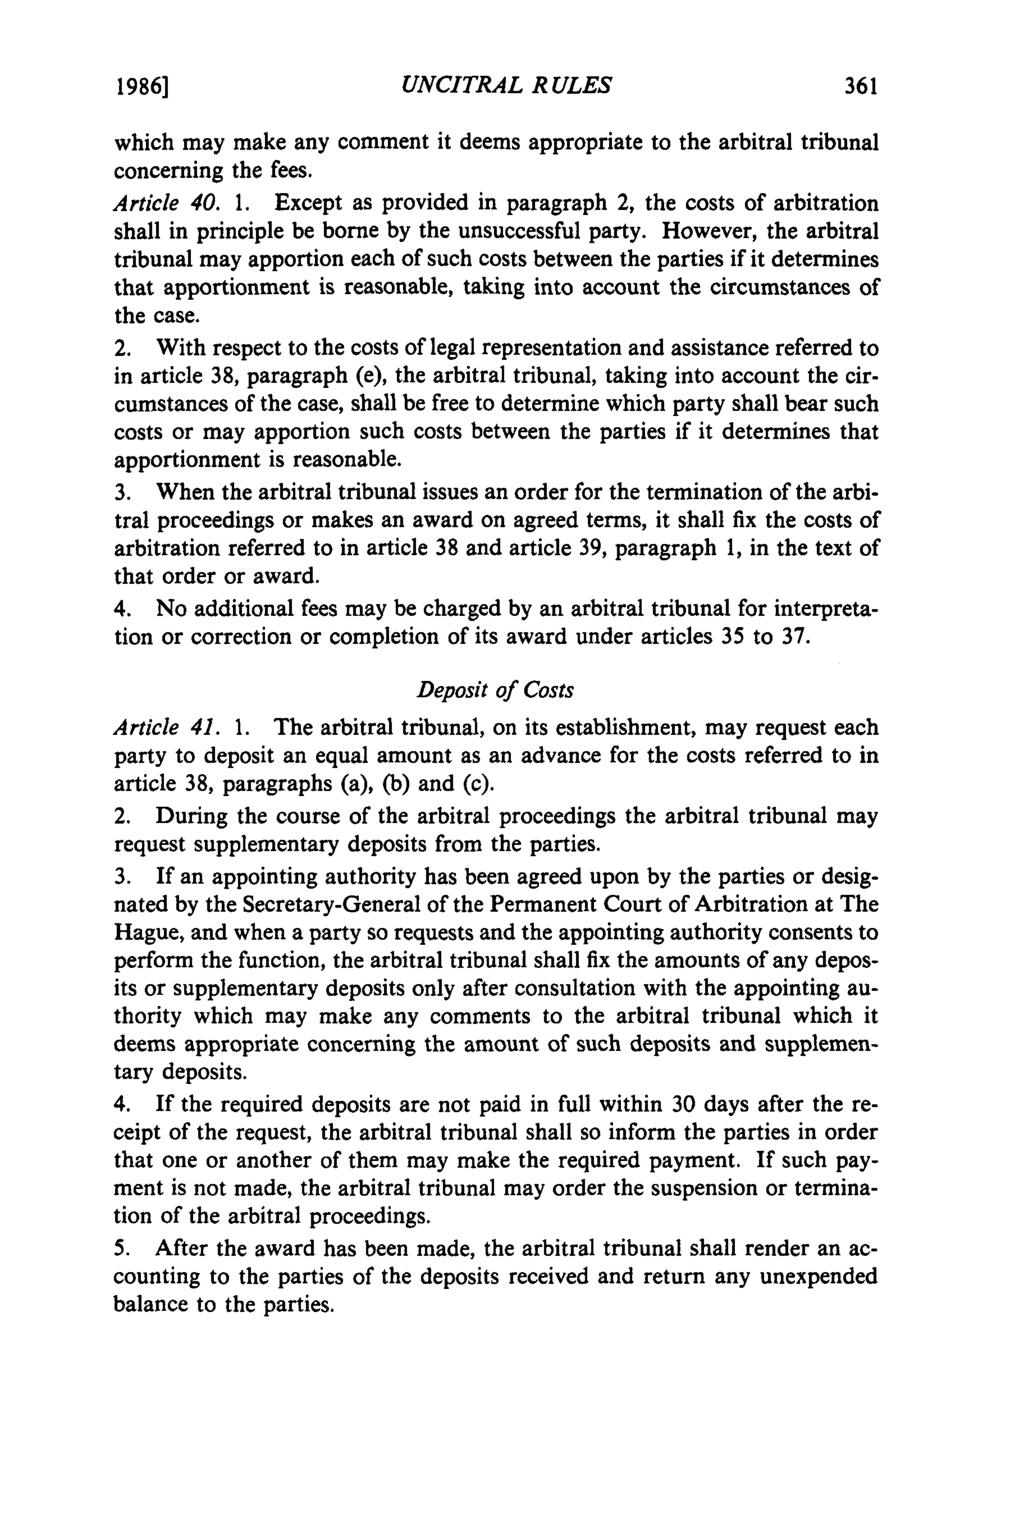 1986] UNCITRAL RULES which may make any comment it deems appropriate to the arbitral tribunal concerning the fees. Article 40. 1.